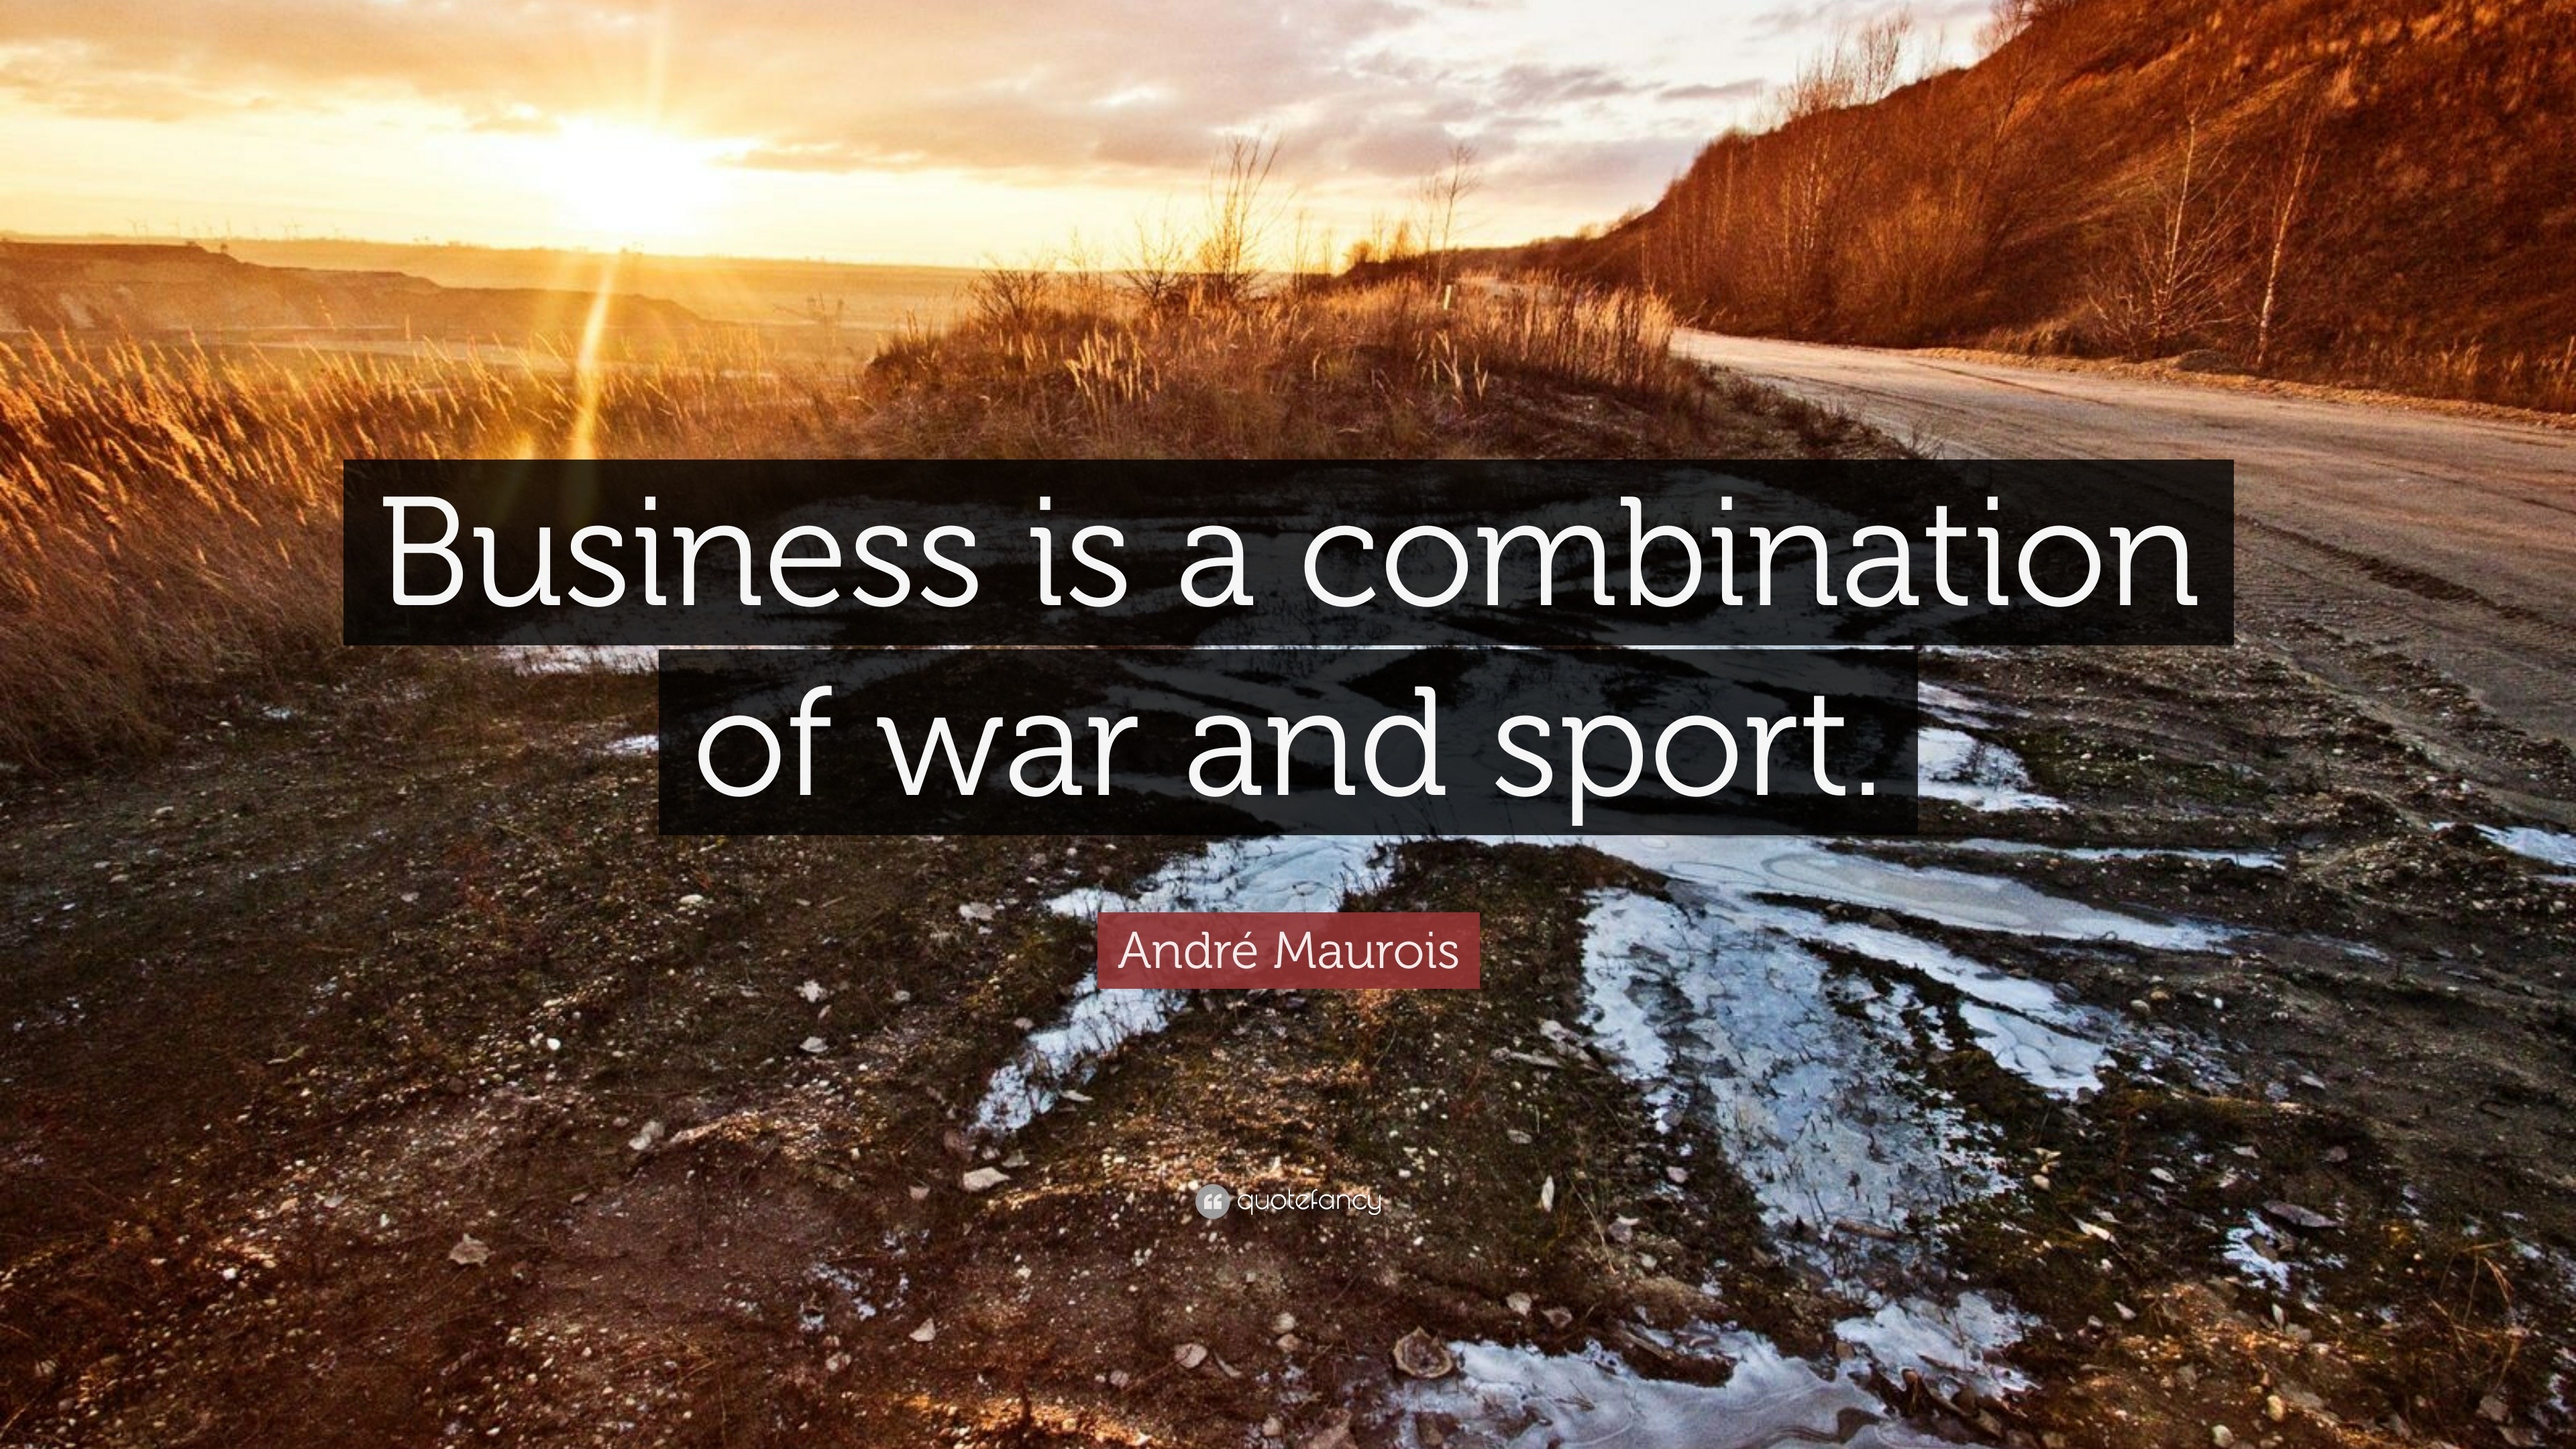 André Maurois Quote: “Business is a combination of war and sport.”